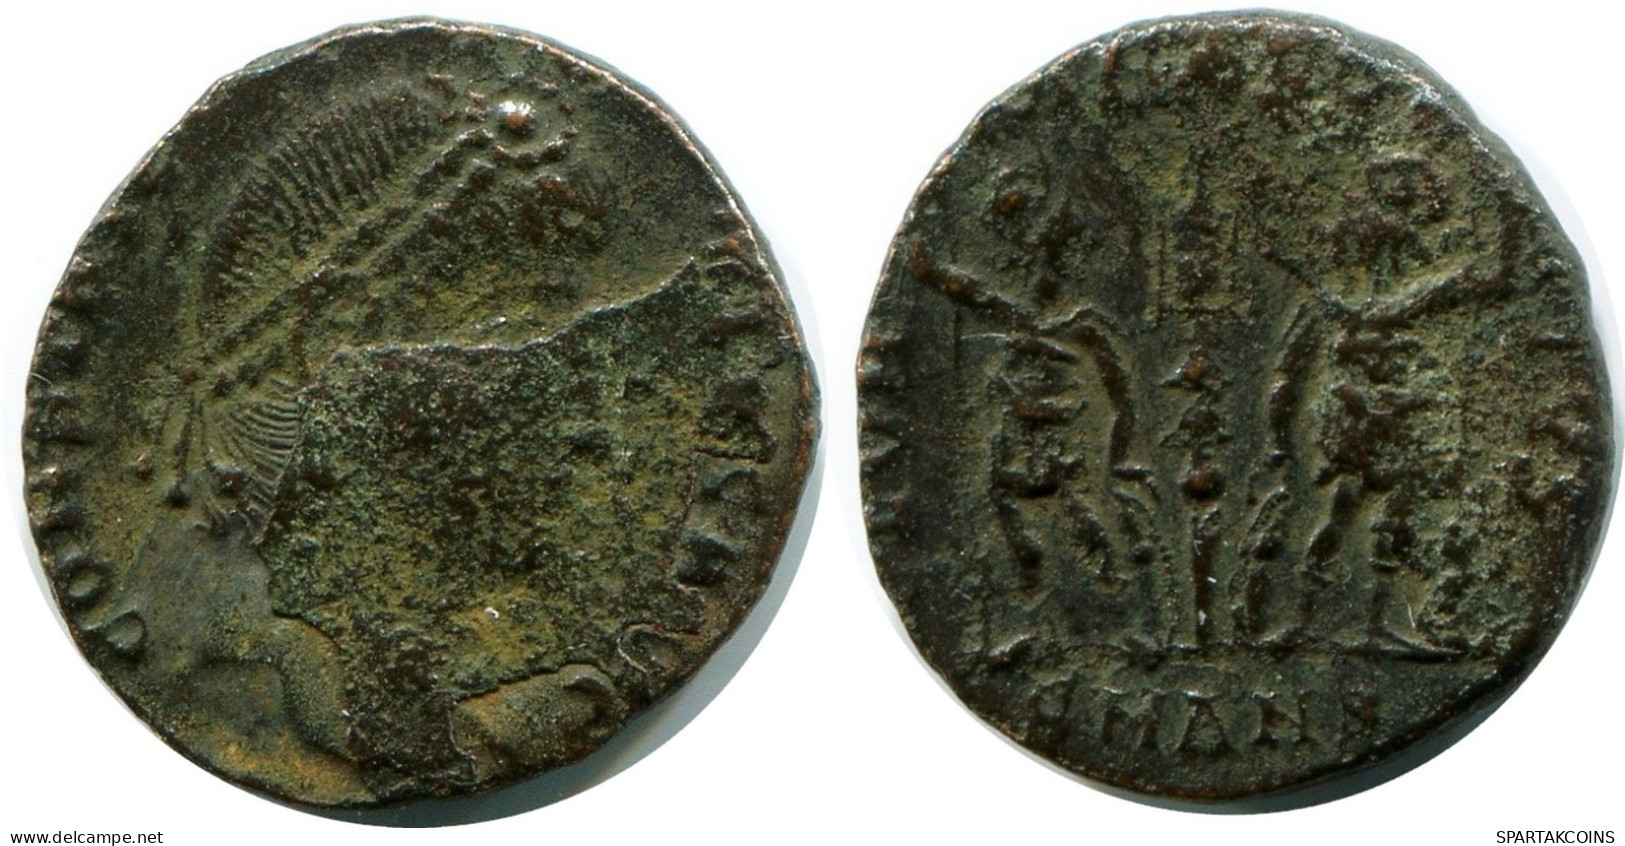 ROMAN Moneda MINTED IN ANTIOCH FROM THE ROYAL ONTARIO MUSEUM #ANC11283.14.E.A - El Imperio Christiano (307 / 363)